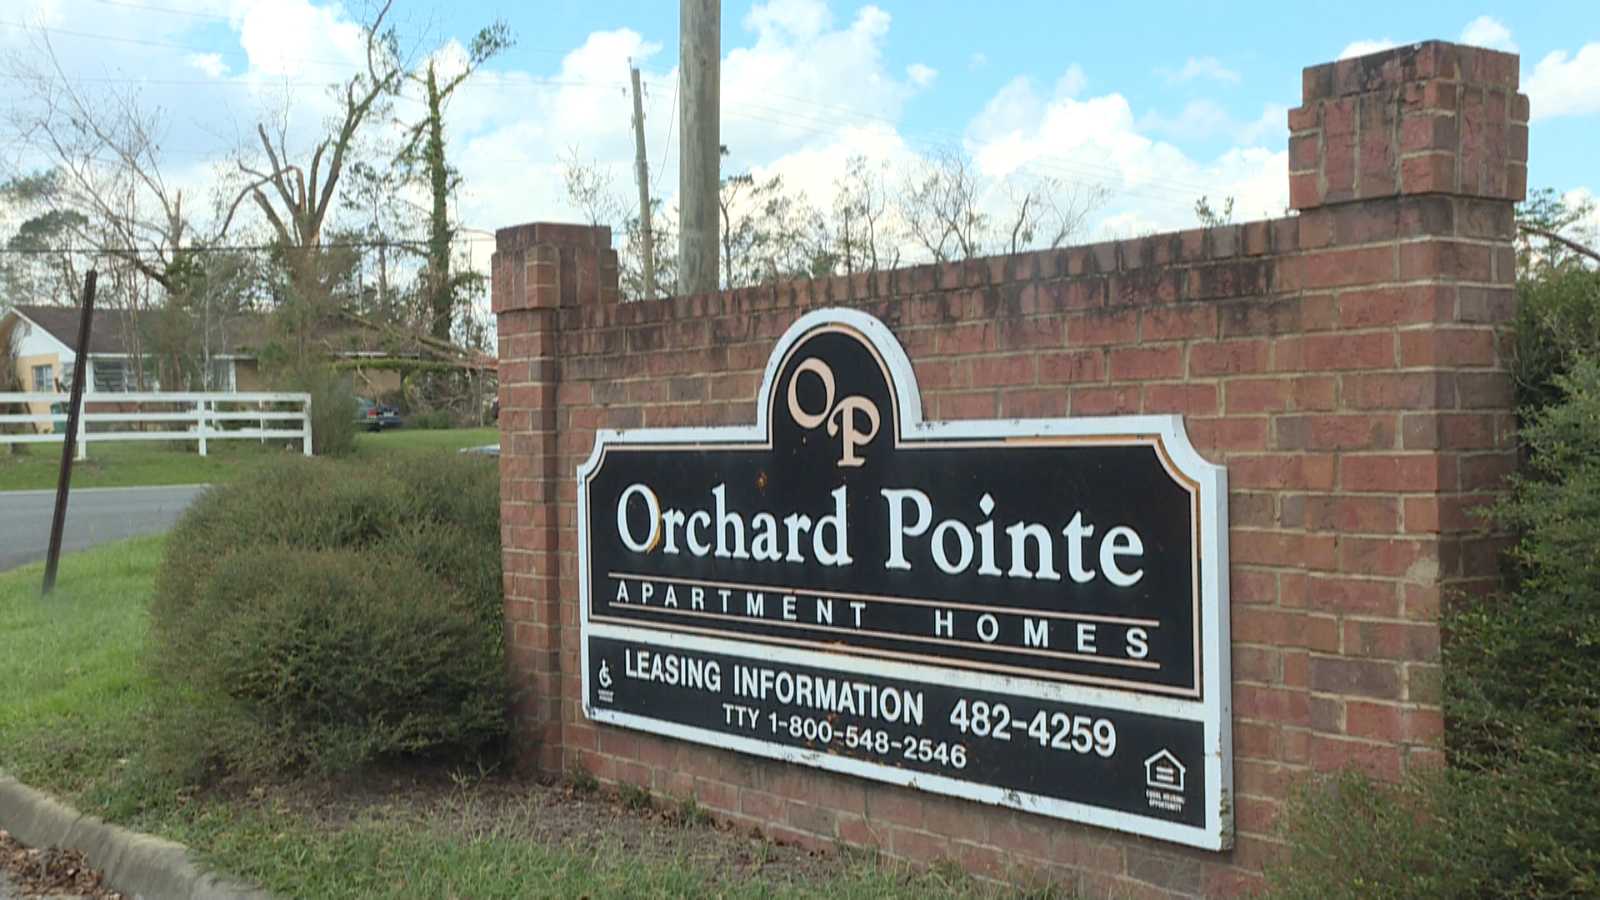 Orchard Pointe Apartments